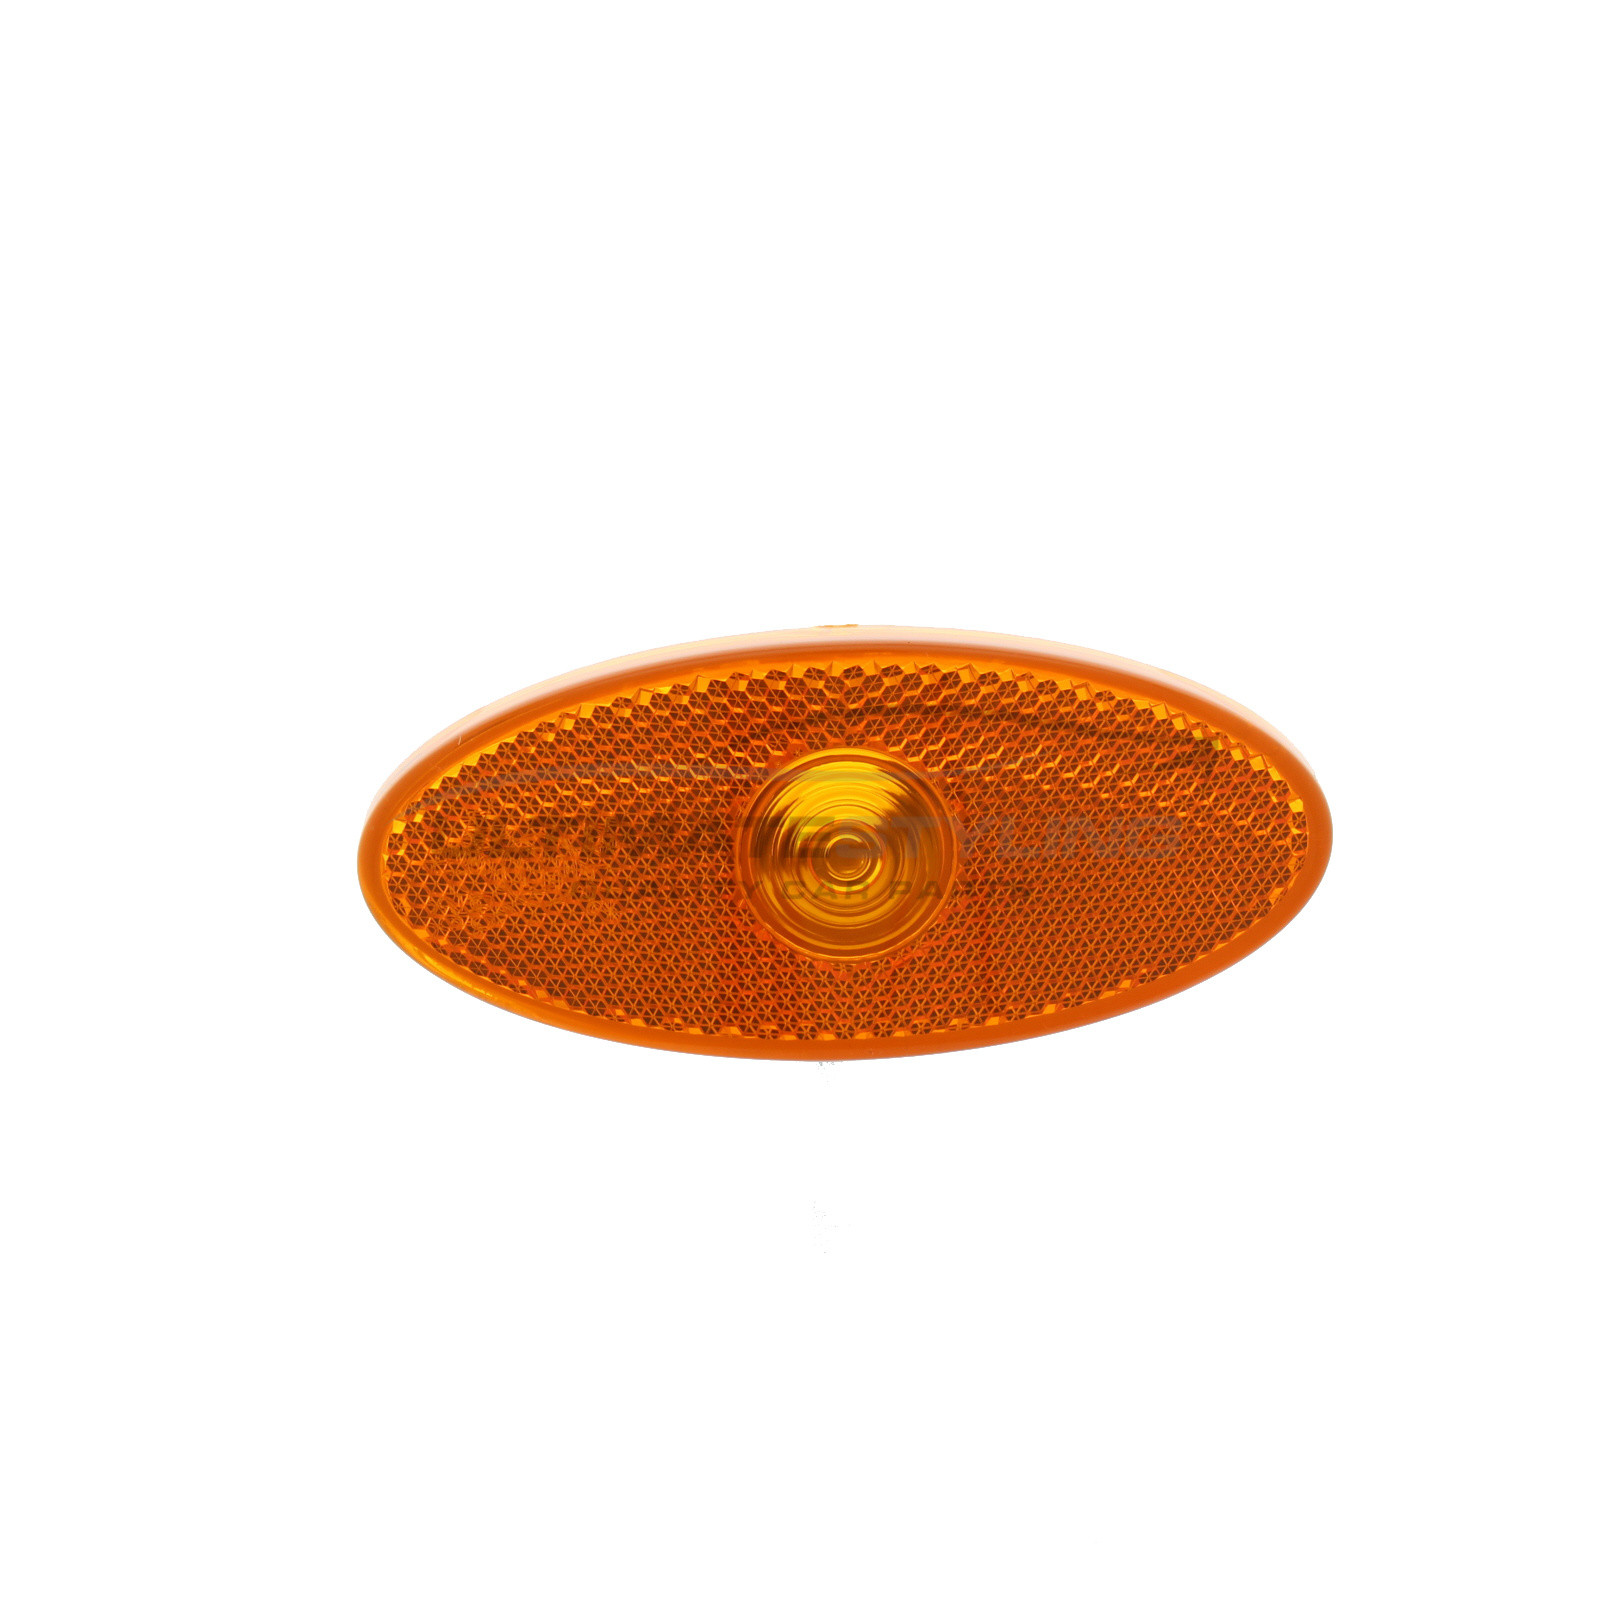 Nissan NV400, Renault Master, Vauxhall Movano Side Repeater - Universal (LH or RH) - Amber lens - Non-LED